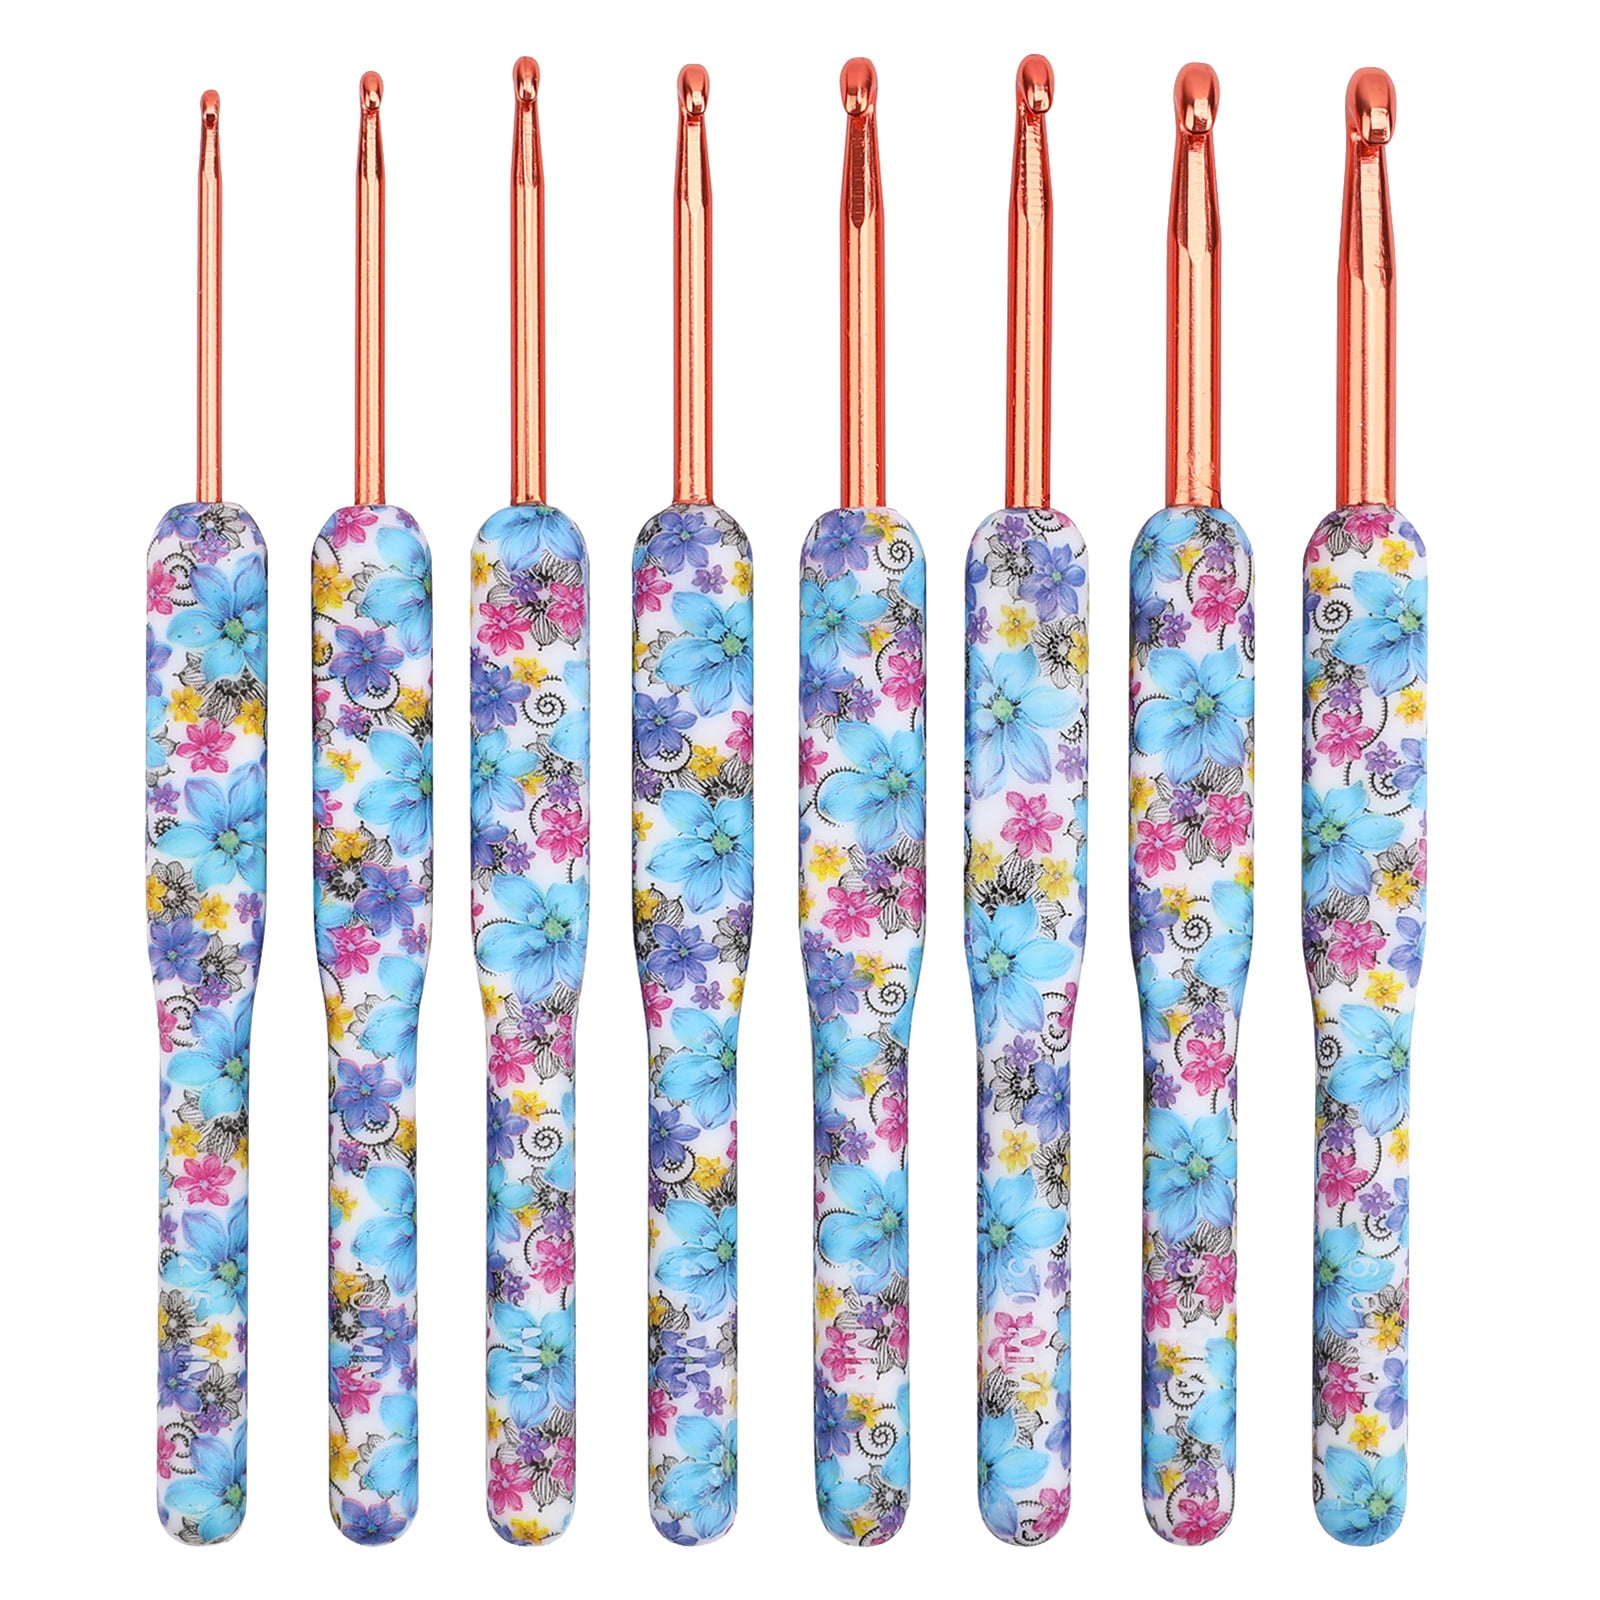 Ymiko Latch Hook Set, Latch Crochet Hook Different Size For Scarf Carpet  Crafts For Braid Hair For Women